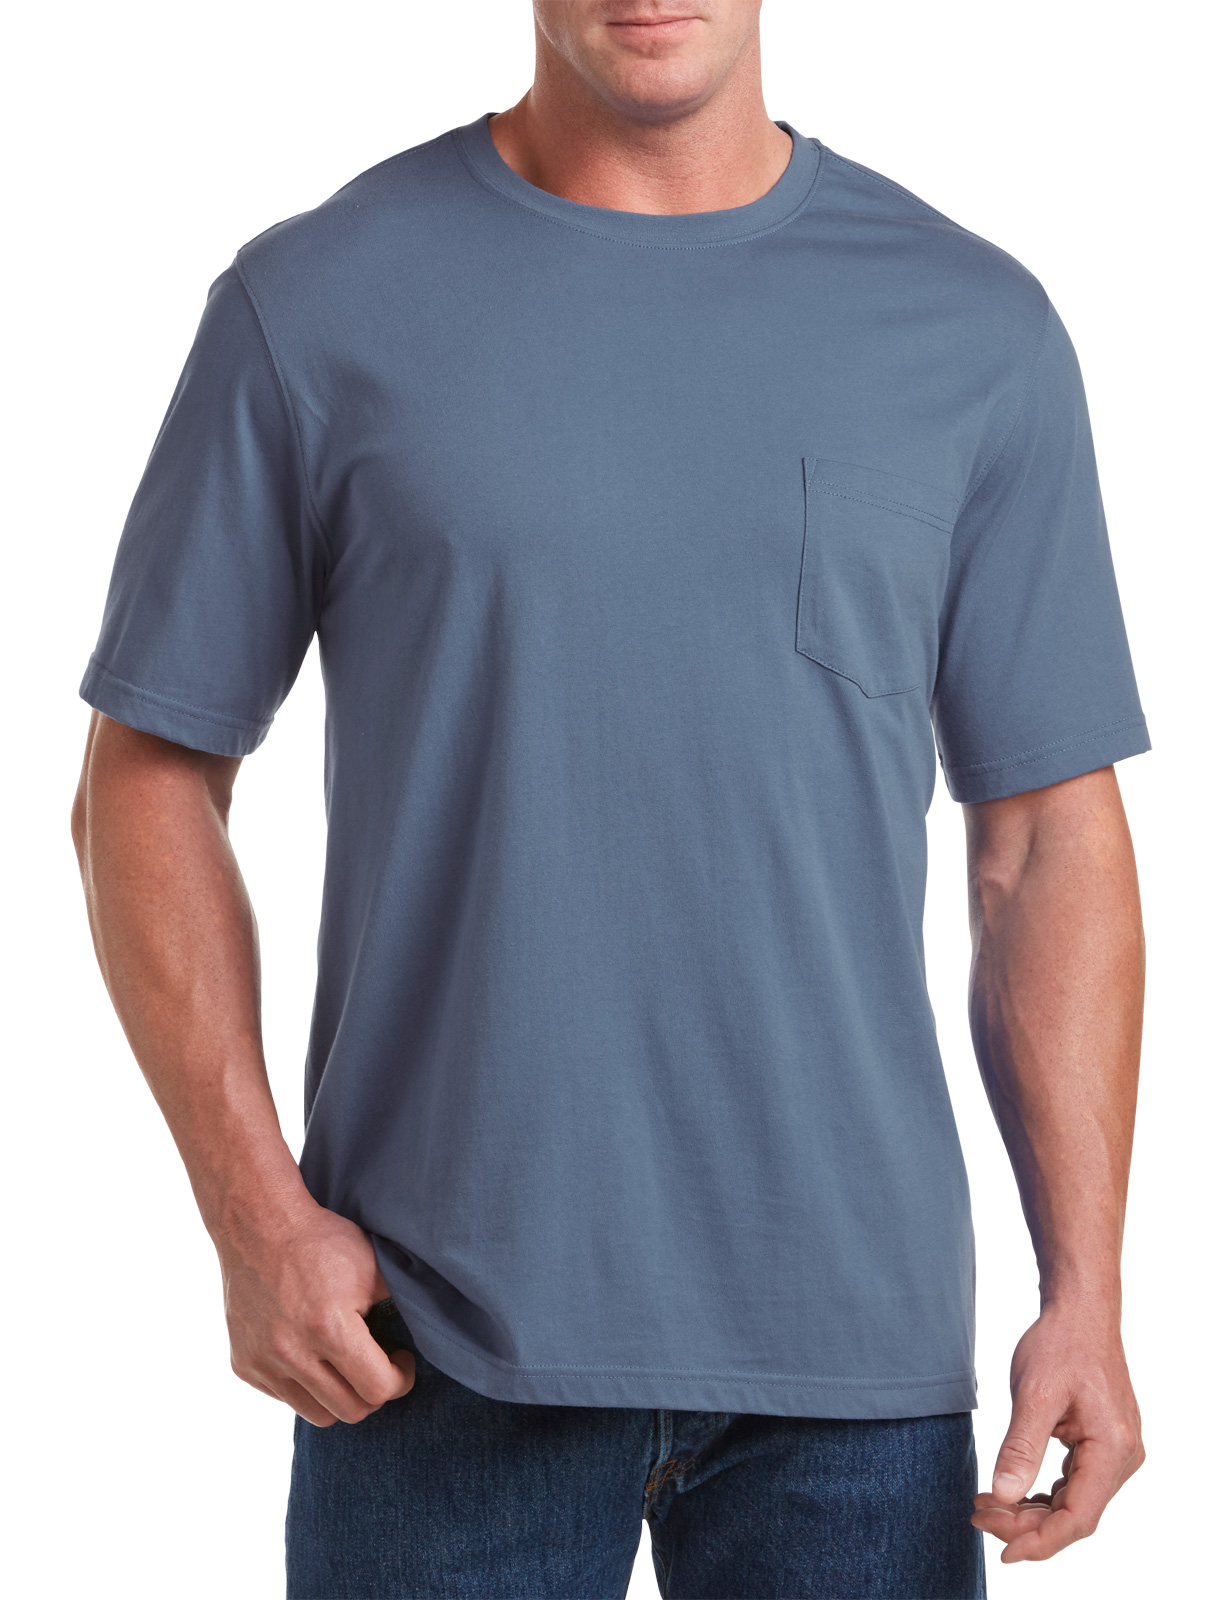 Harbor Bay Men's Big and Tall Wicking Jersey Pocket Tee